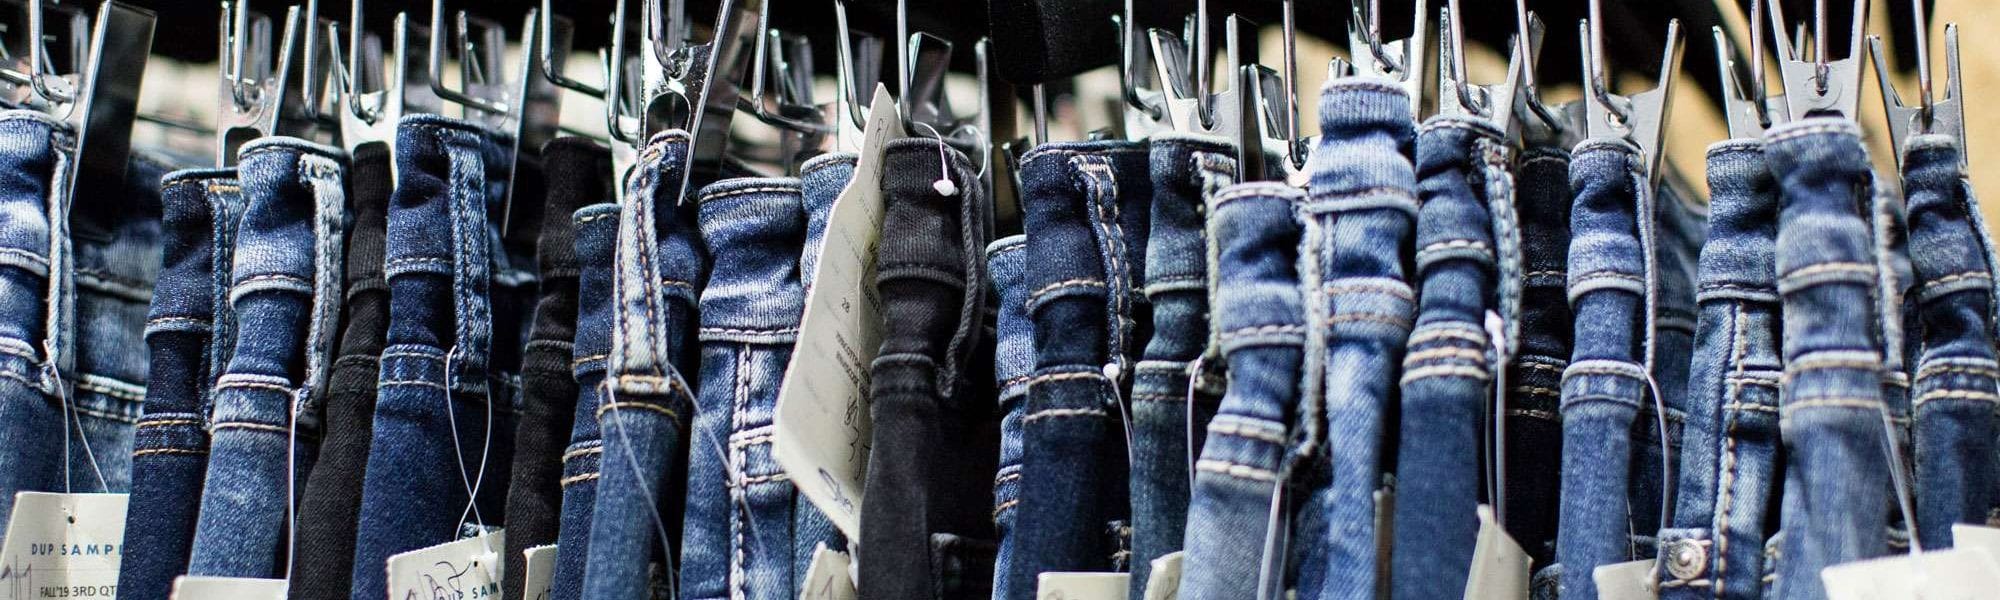 a rack of jeans